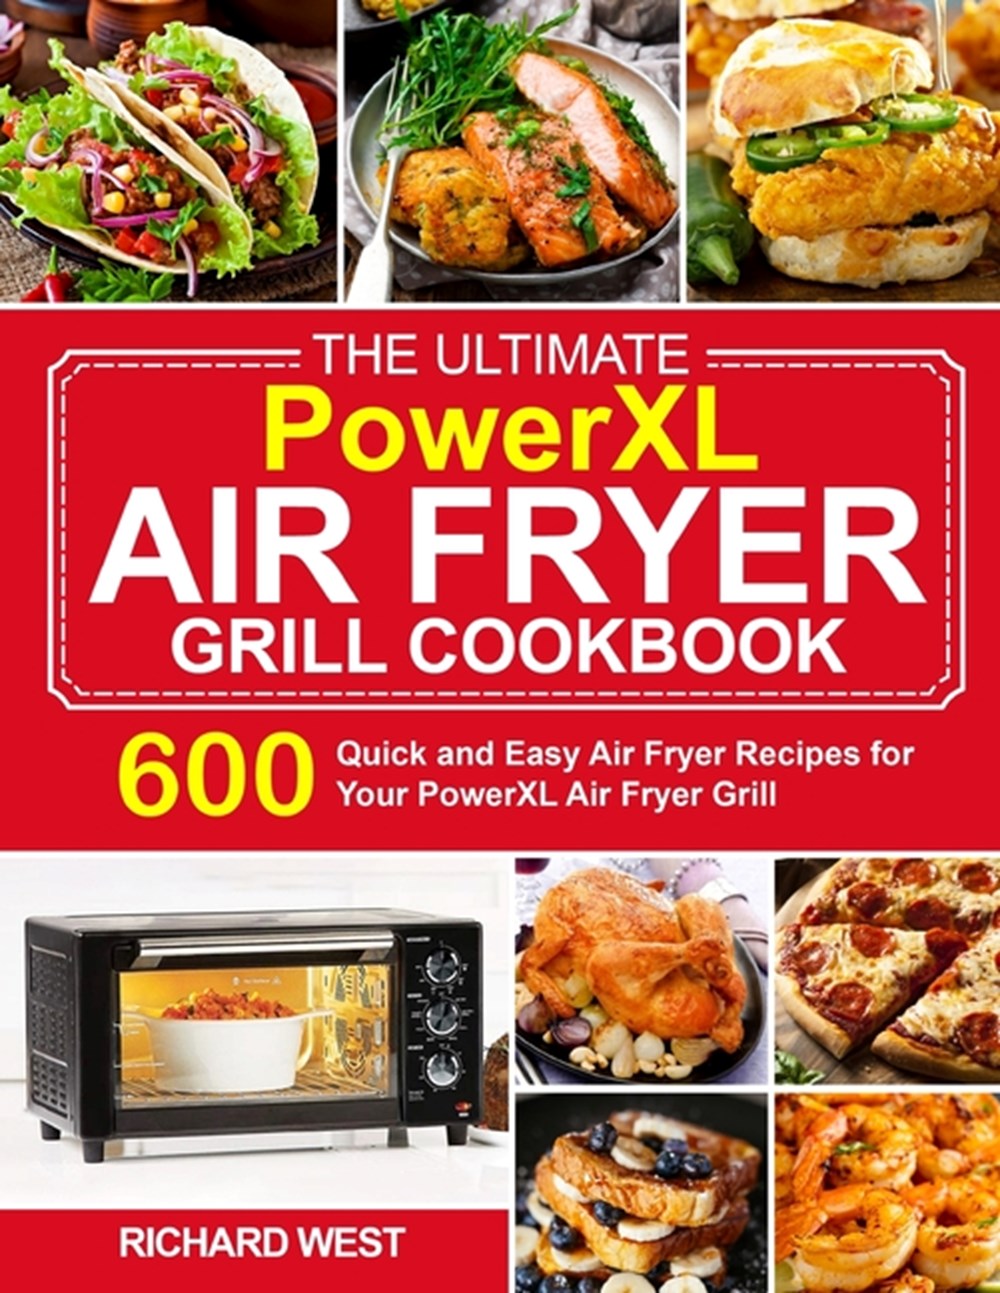 Buy The Ultimate PowerXL Air Fryer Grill Cookbook by Richard West